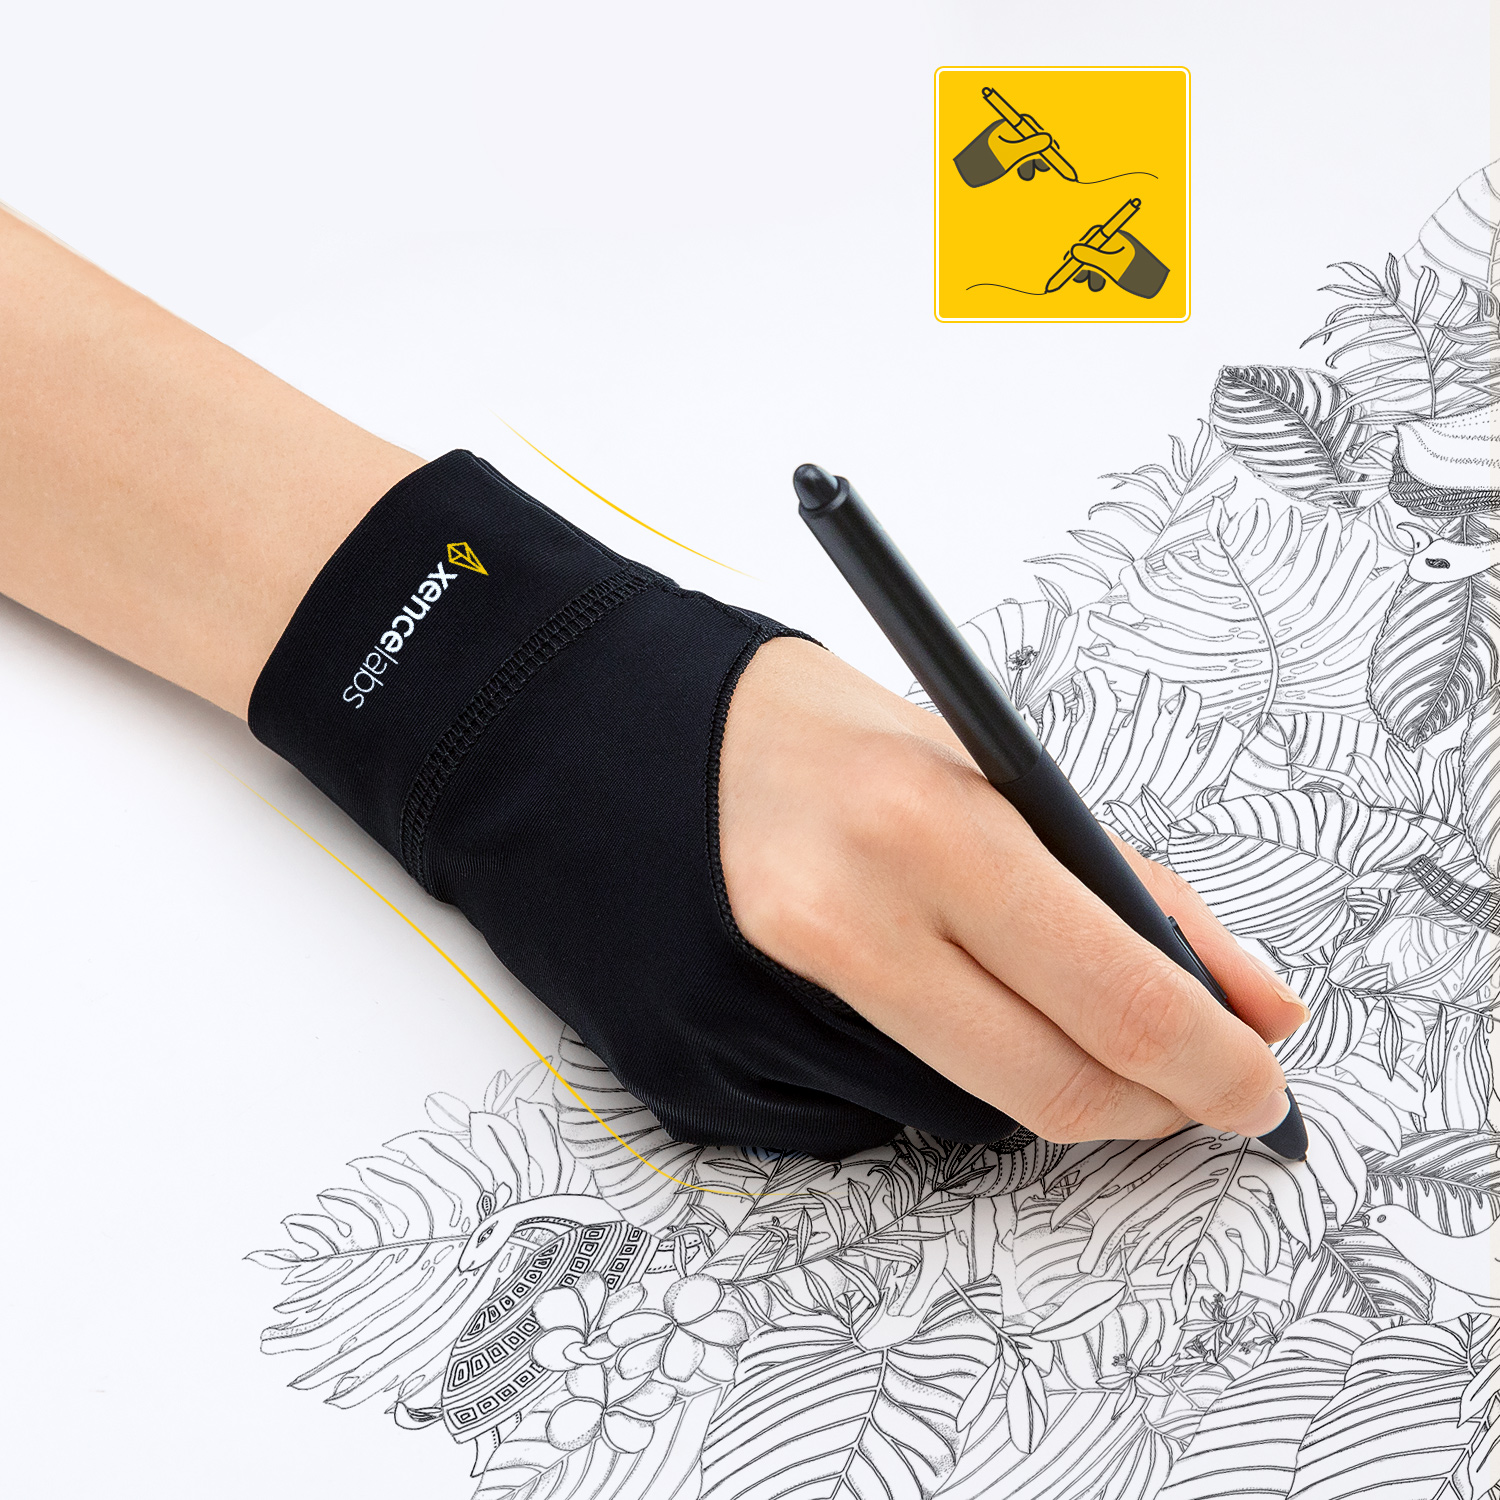 Tablet Drawing Glove Artist Glove For Ipad Pro Pencil / Graphic